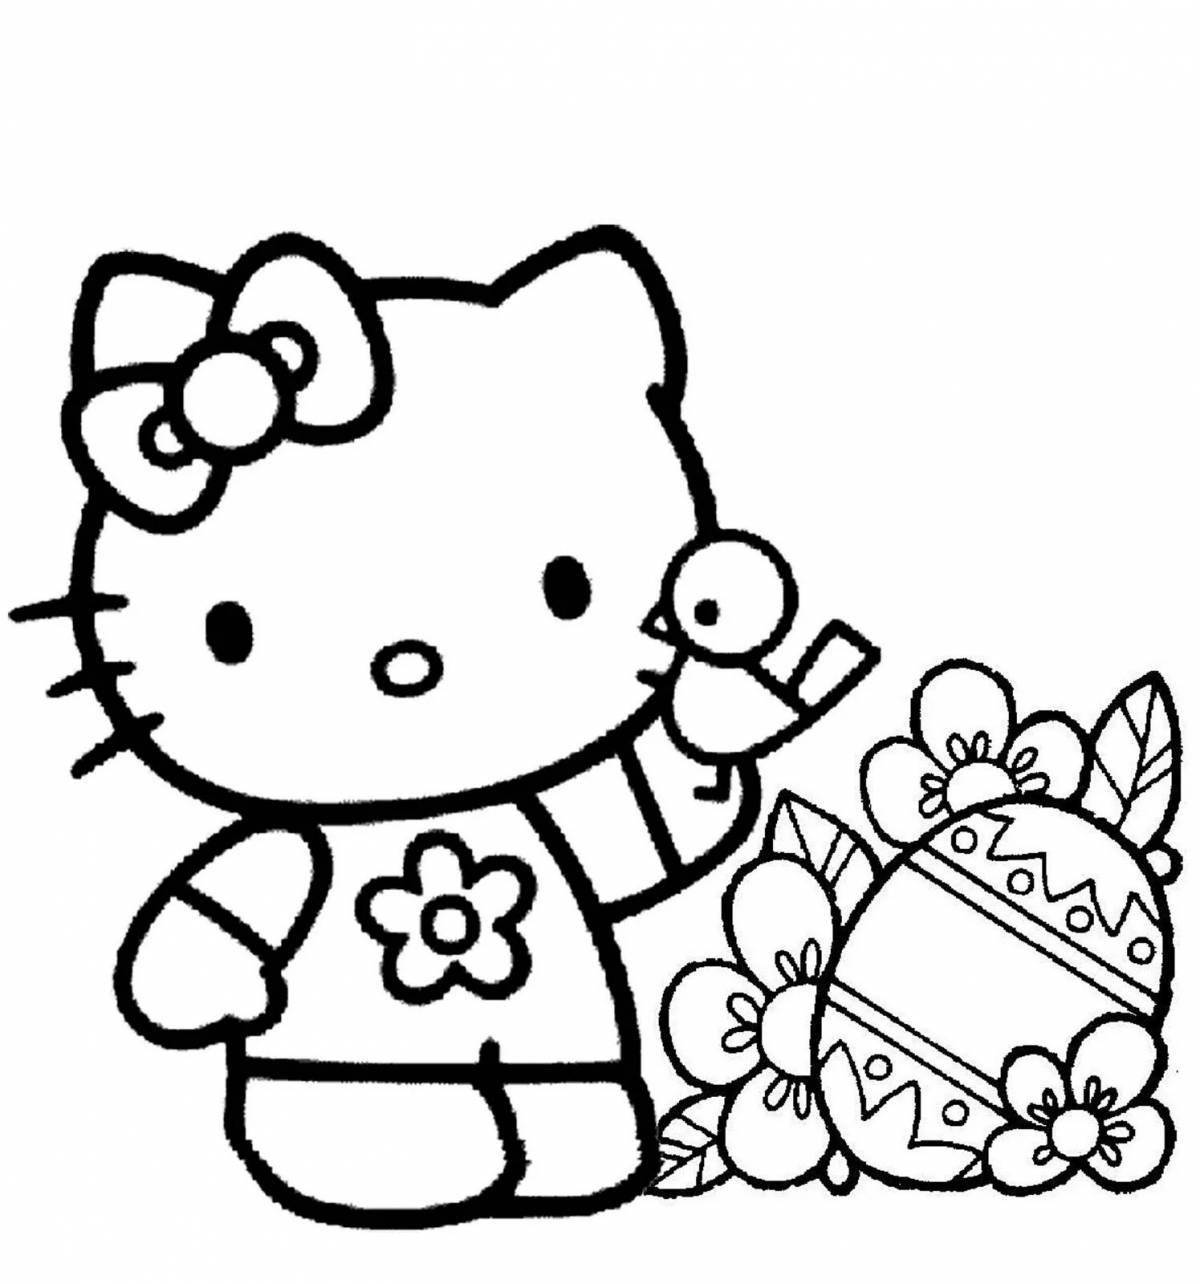 Funky hello kitty small coloring page